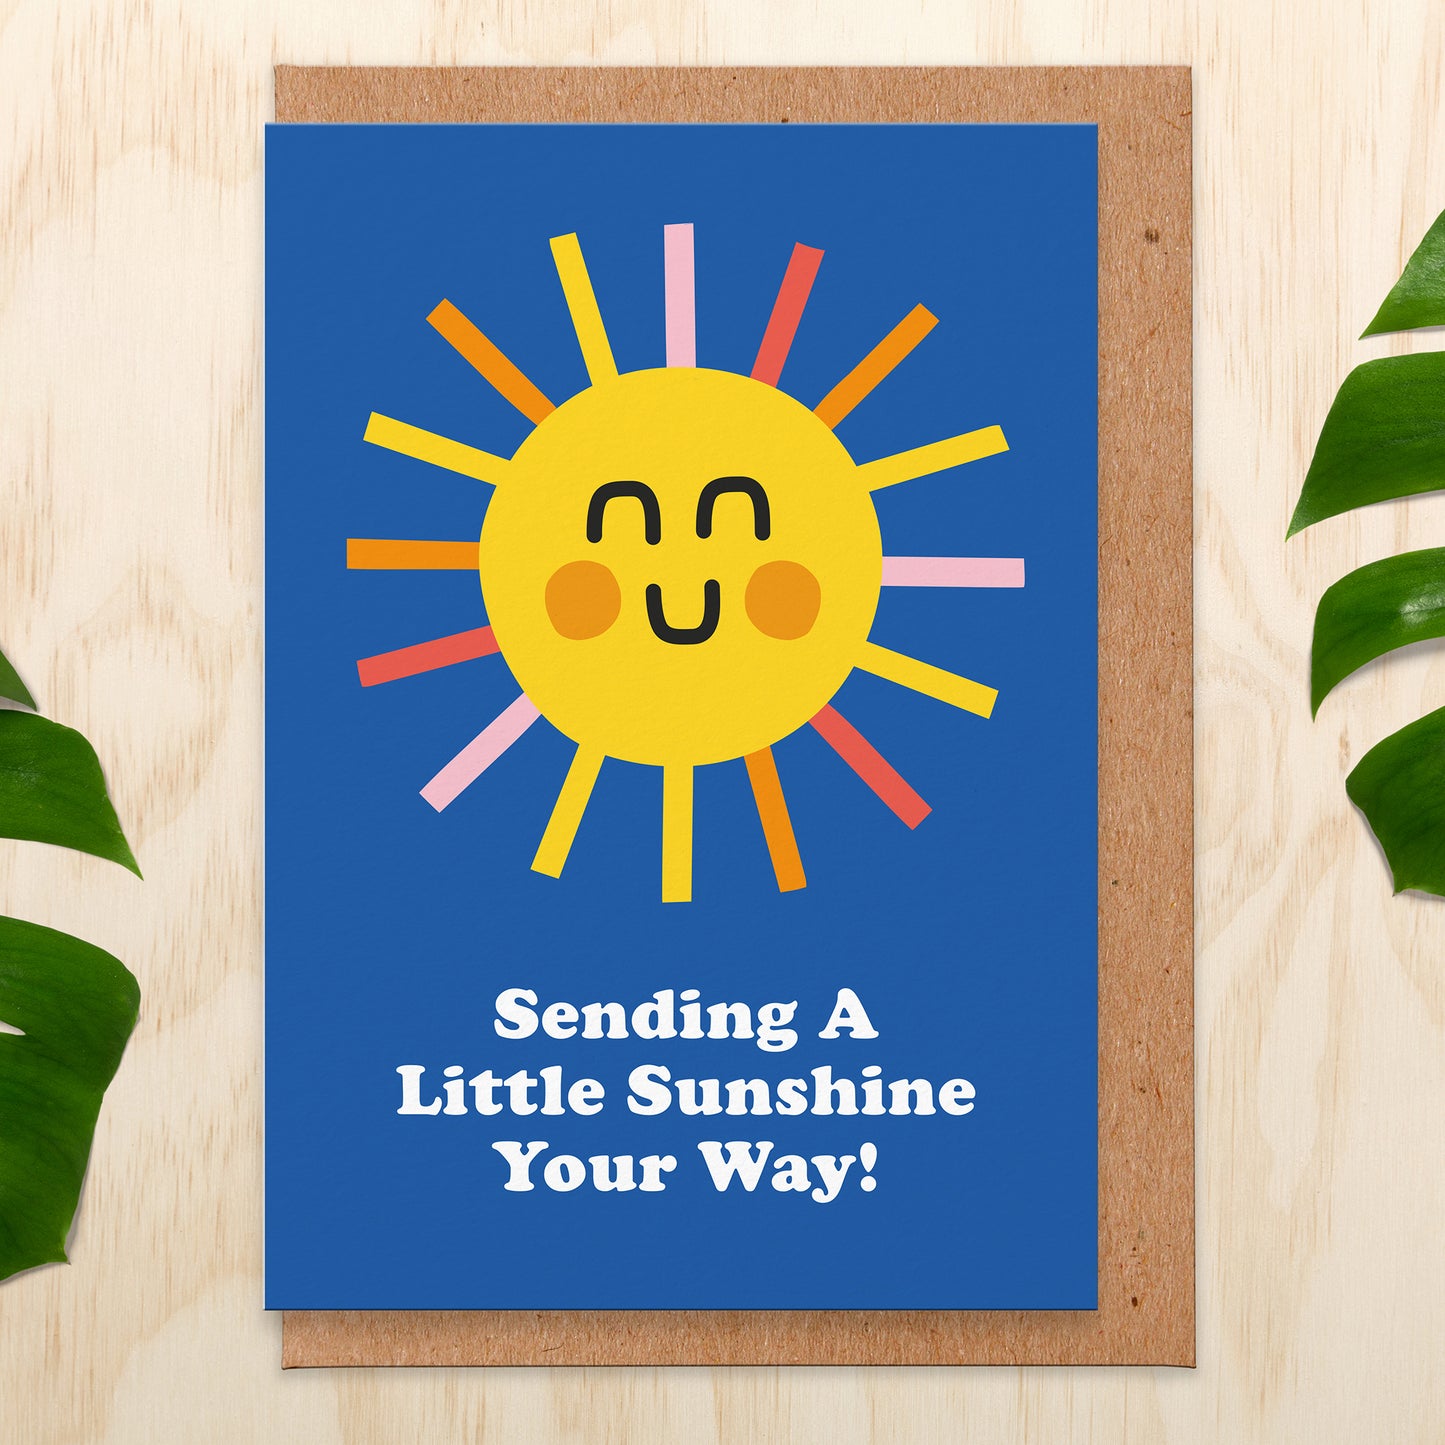 Greetings card with a sun on a blue background that reads Sending A Little Sunshine Your Way!